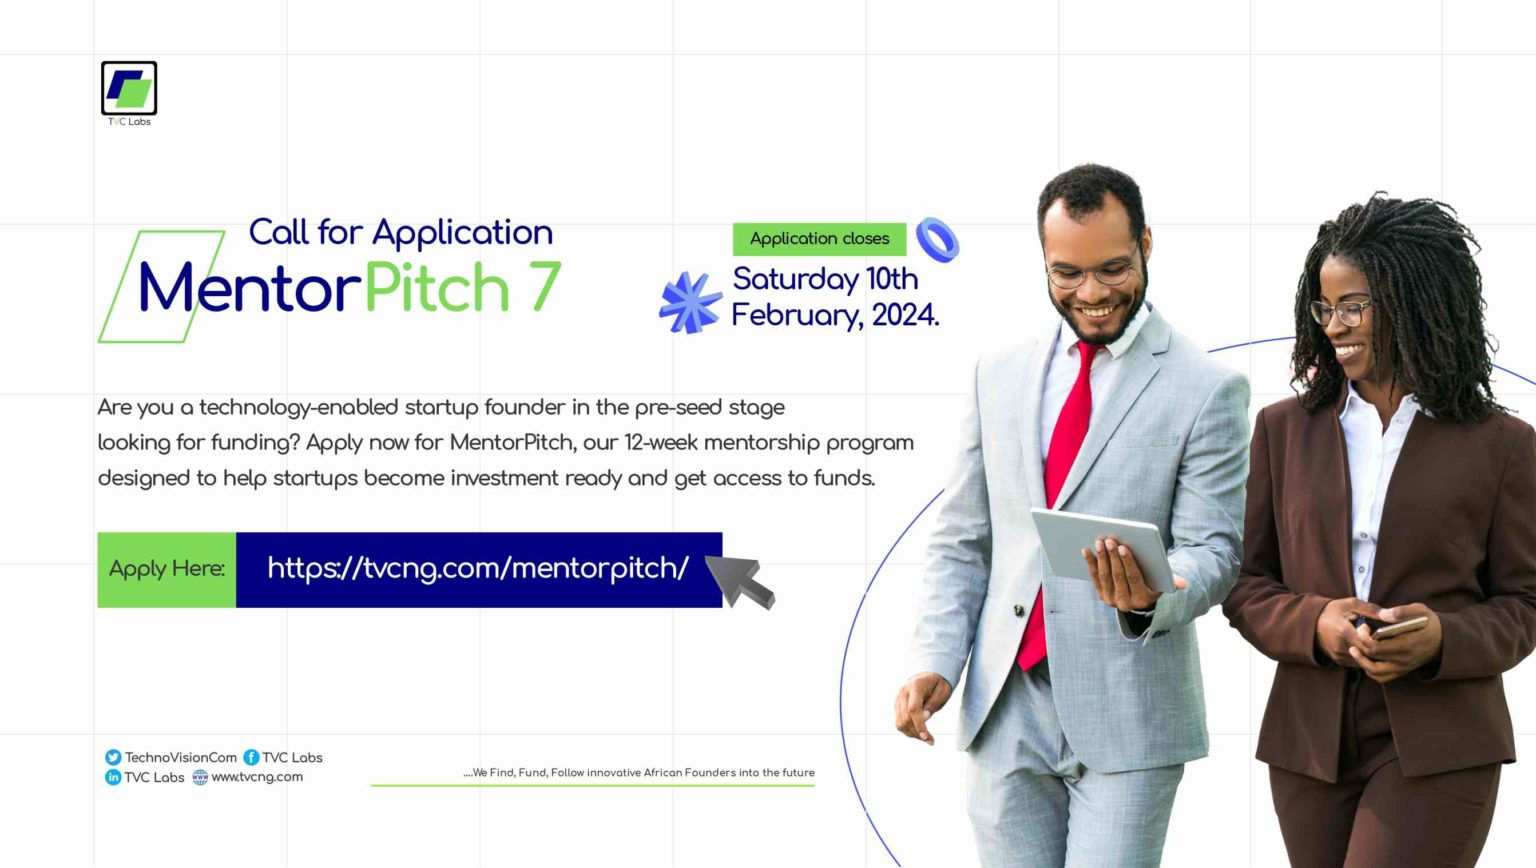 TVC Labs MentorPitch 7 Program for Pre-seed stage startups